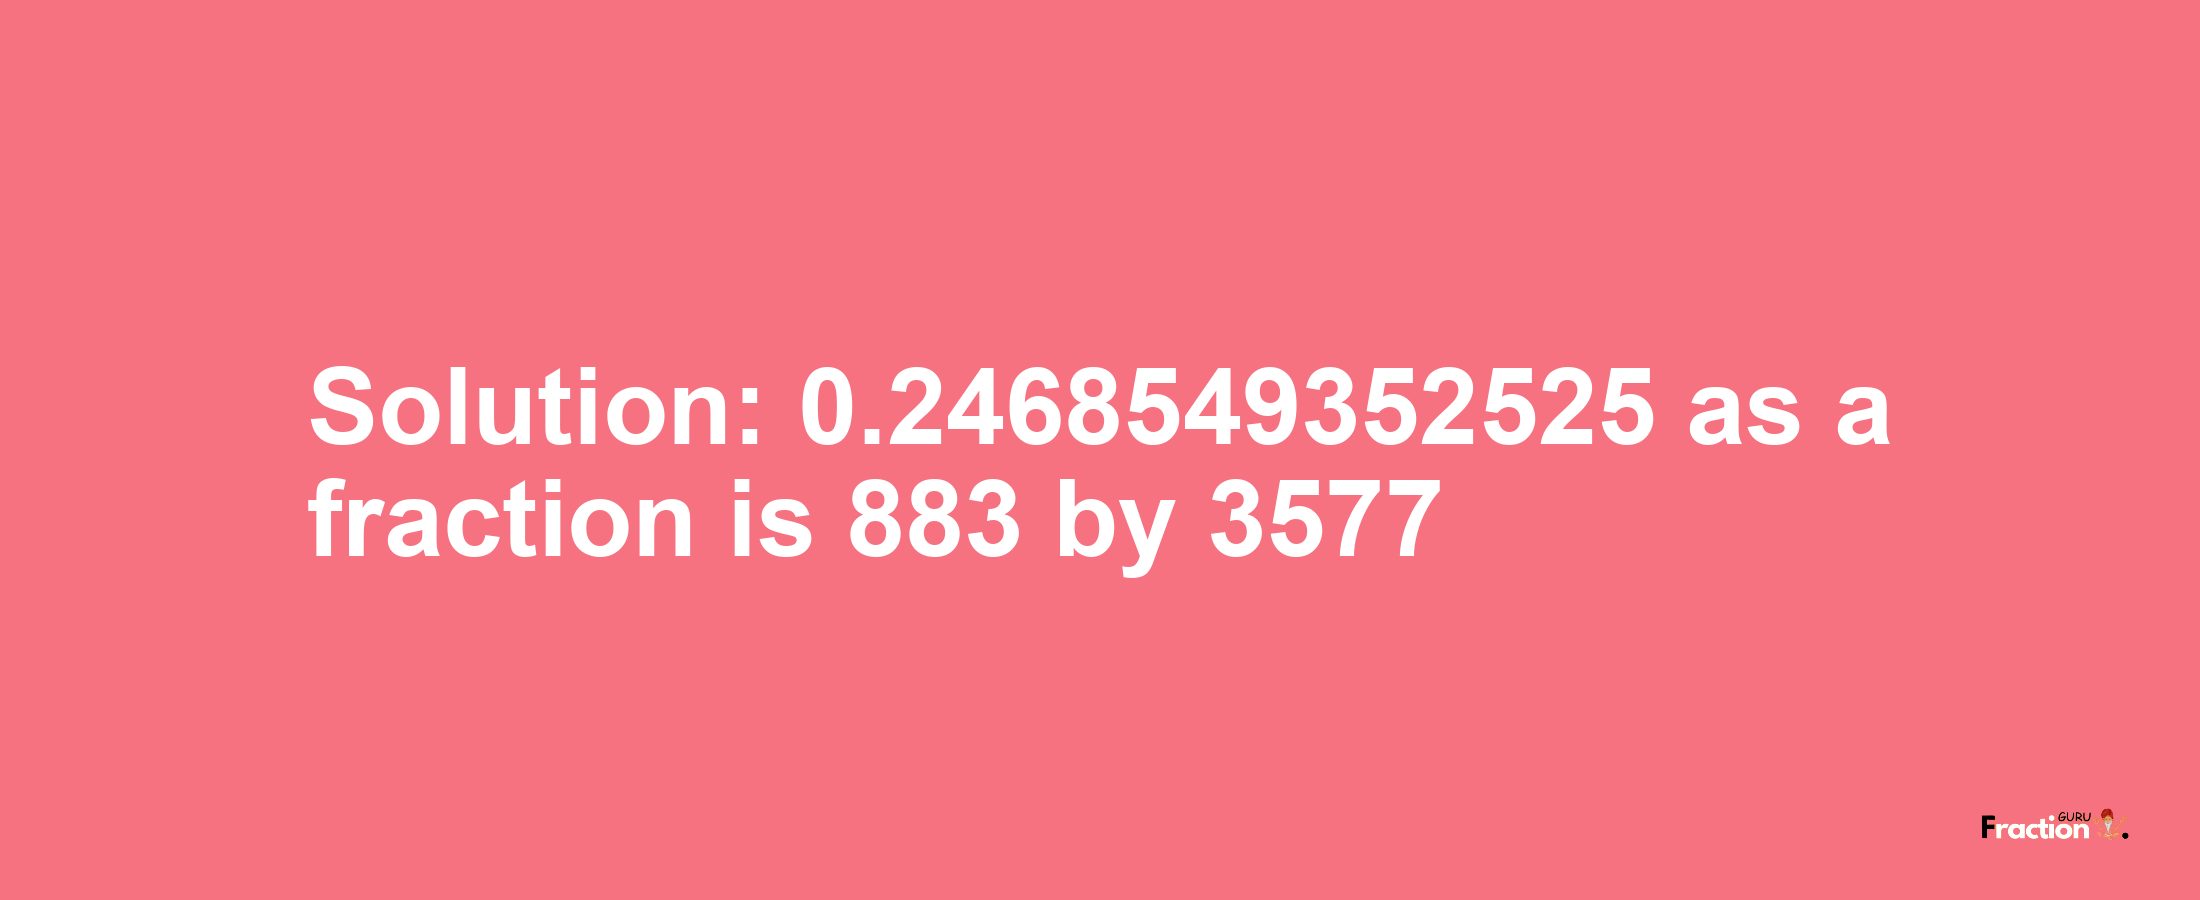 Solution:0.2468549352525 as a fraction is 883/3577